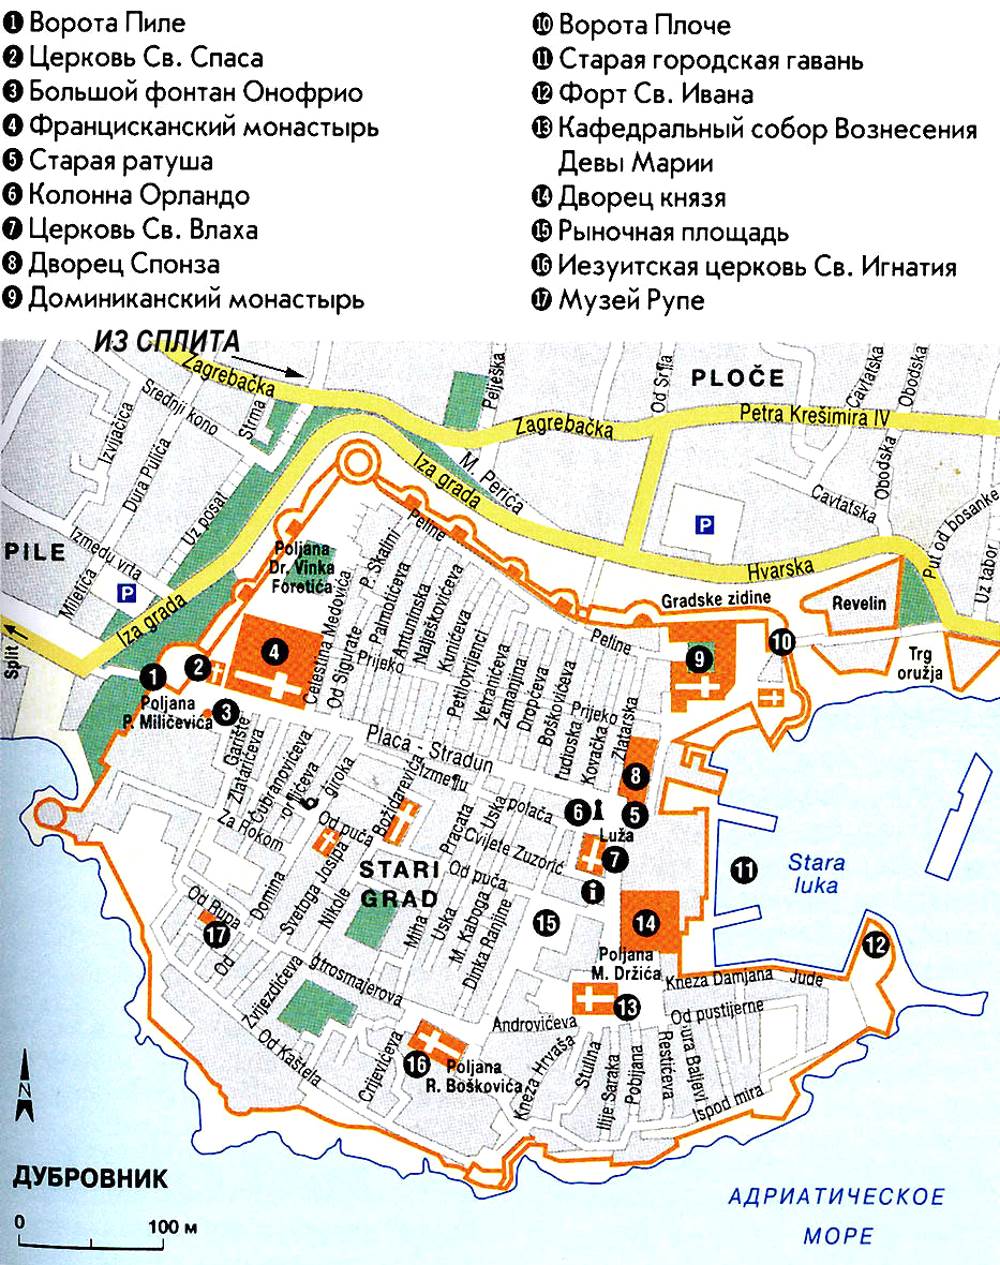 Dubrovnik sights on the city map